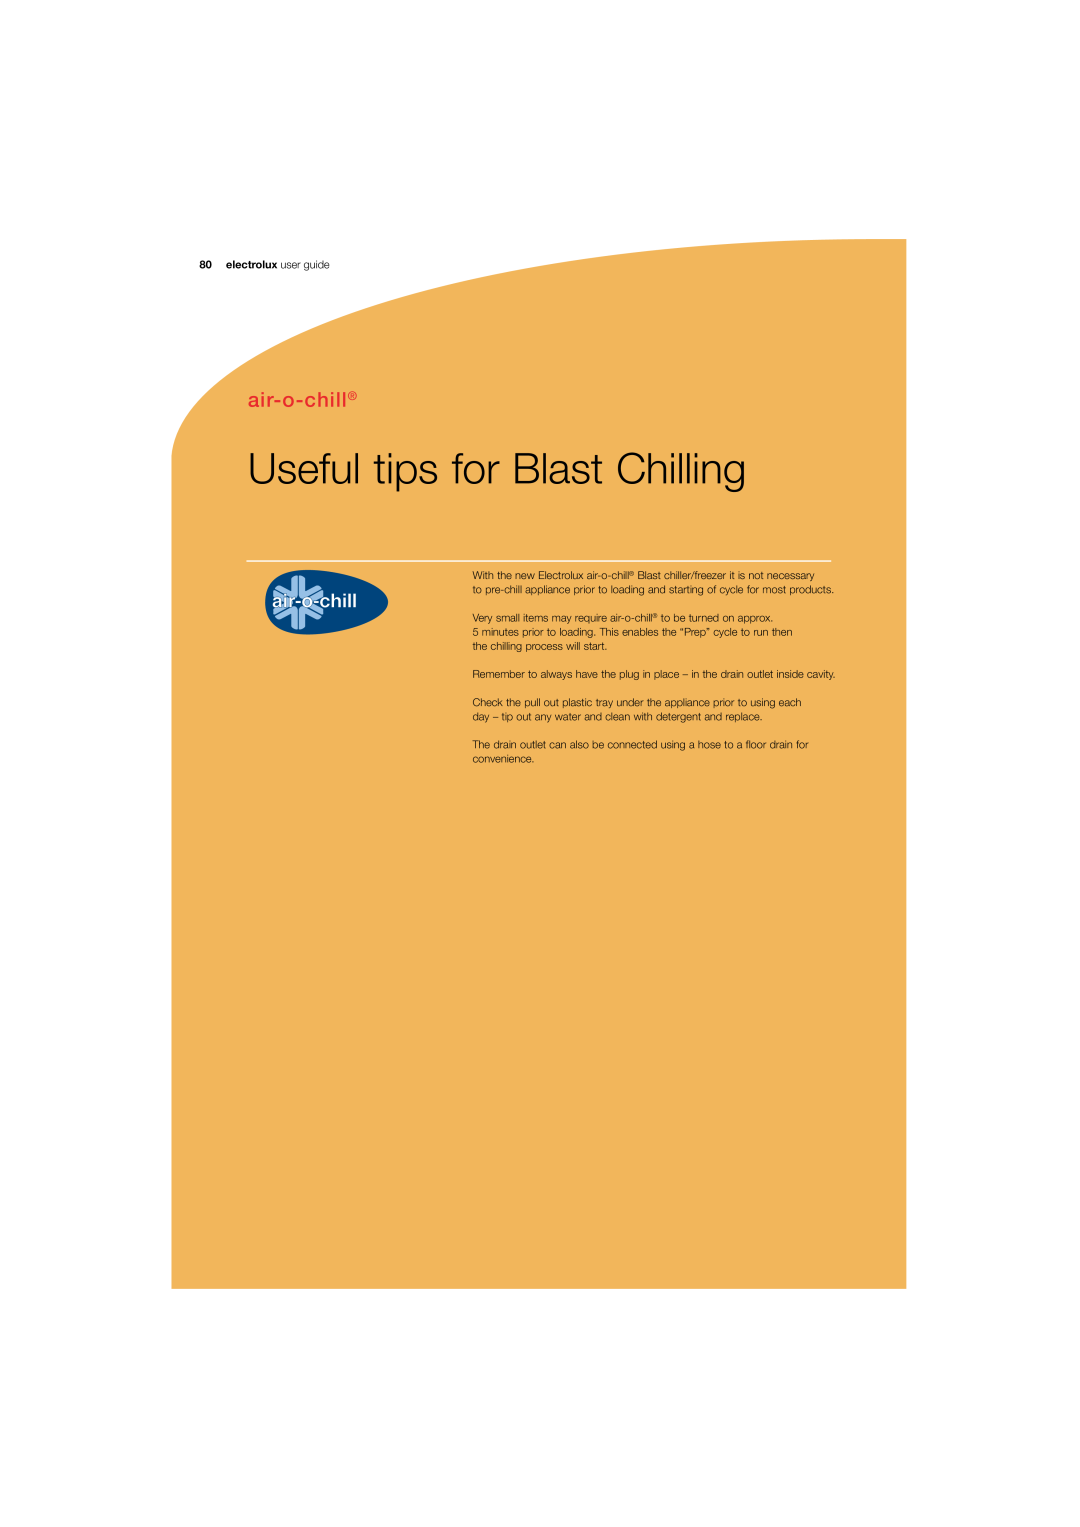 Electrolux 180 manual Useful tips for Blast Chilling, air-o-chill, electrolux user guide 